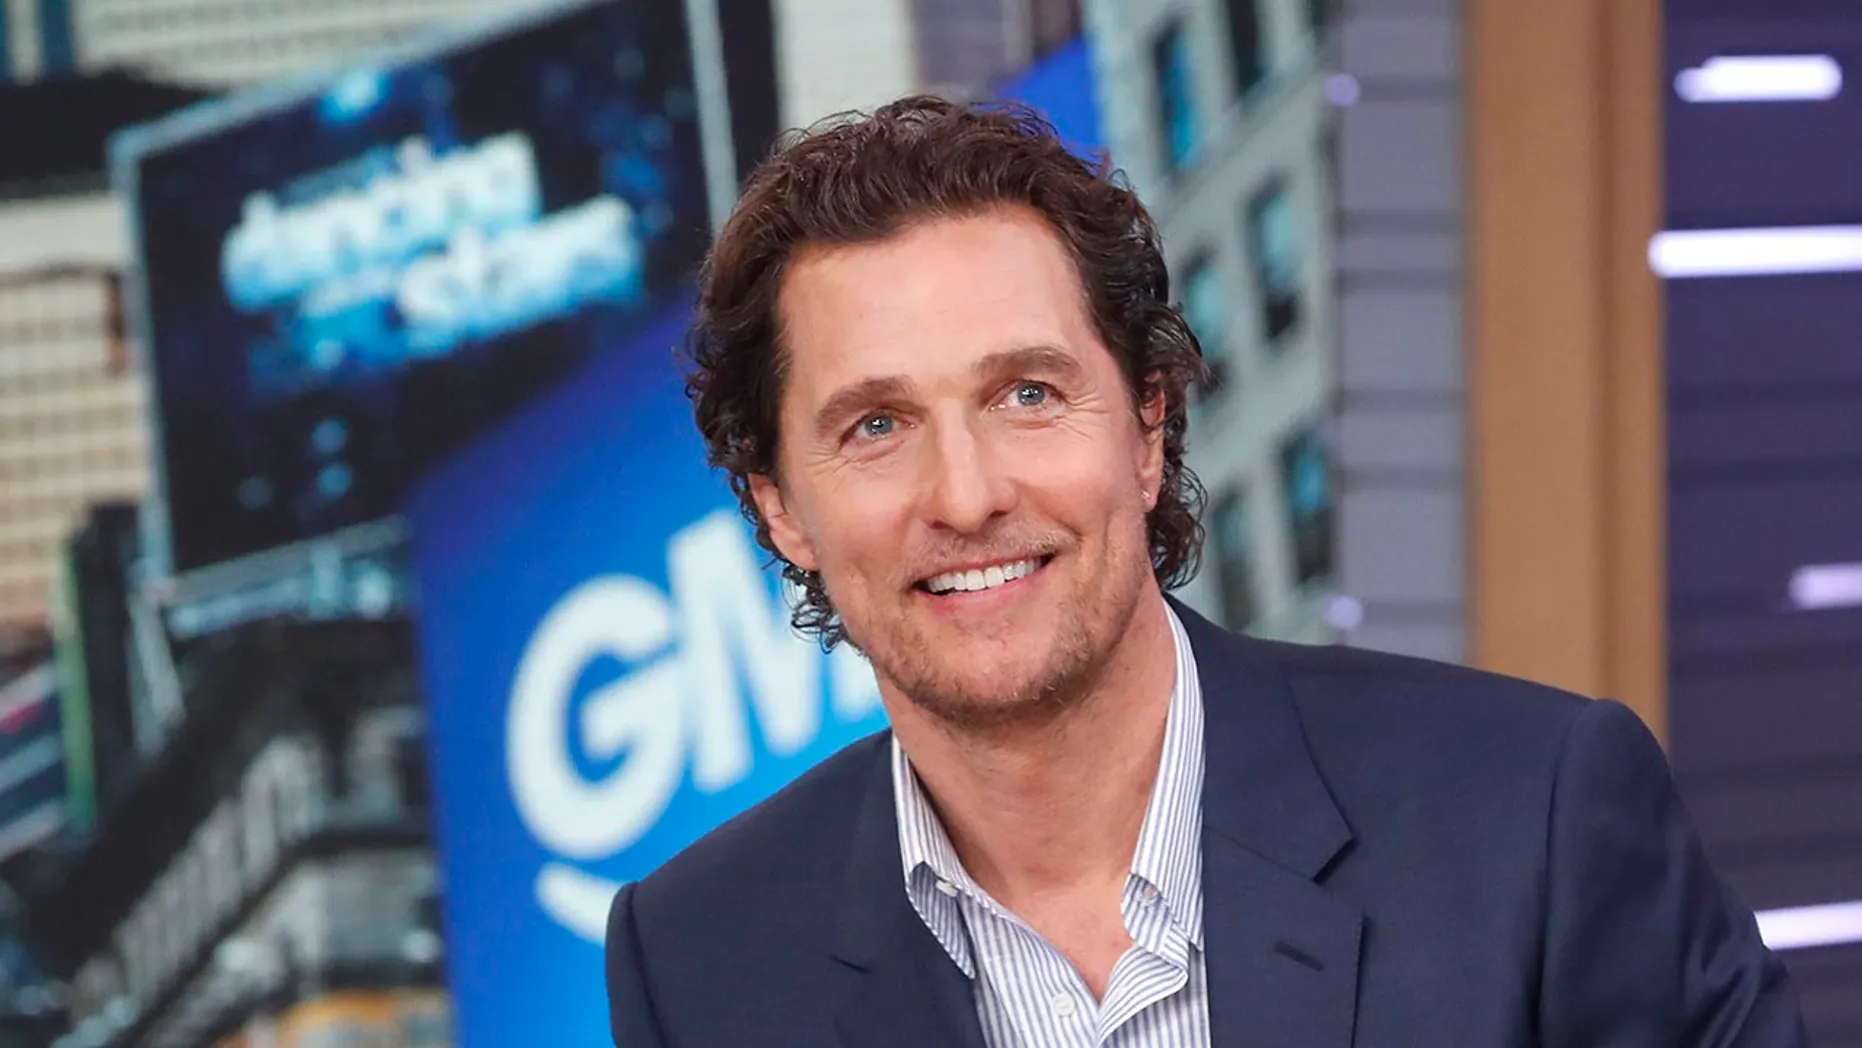 ”matthew-mcconaughey-asks-for-justice-after-mass-shooting-in-texas”